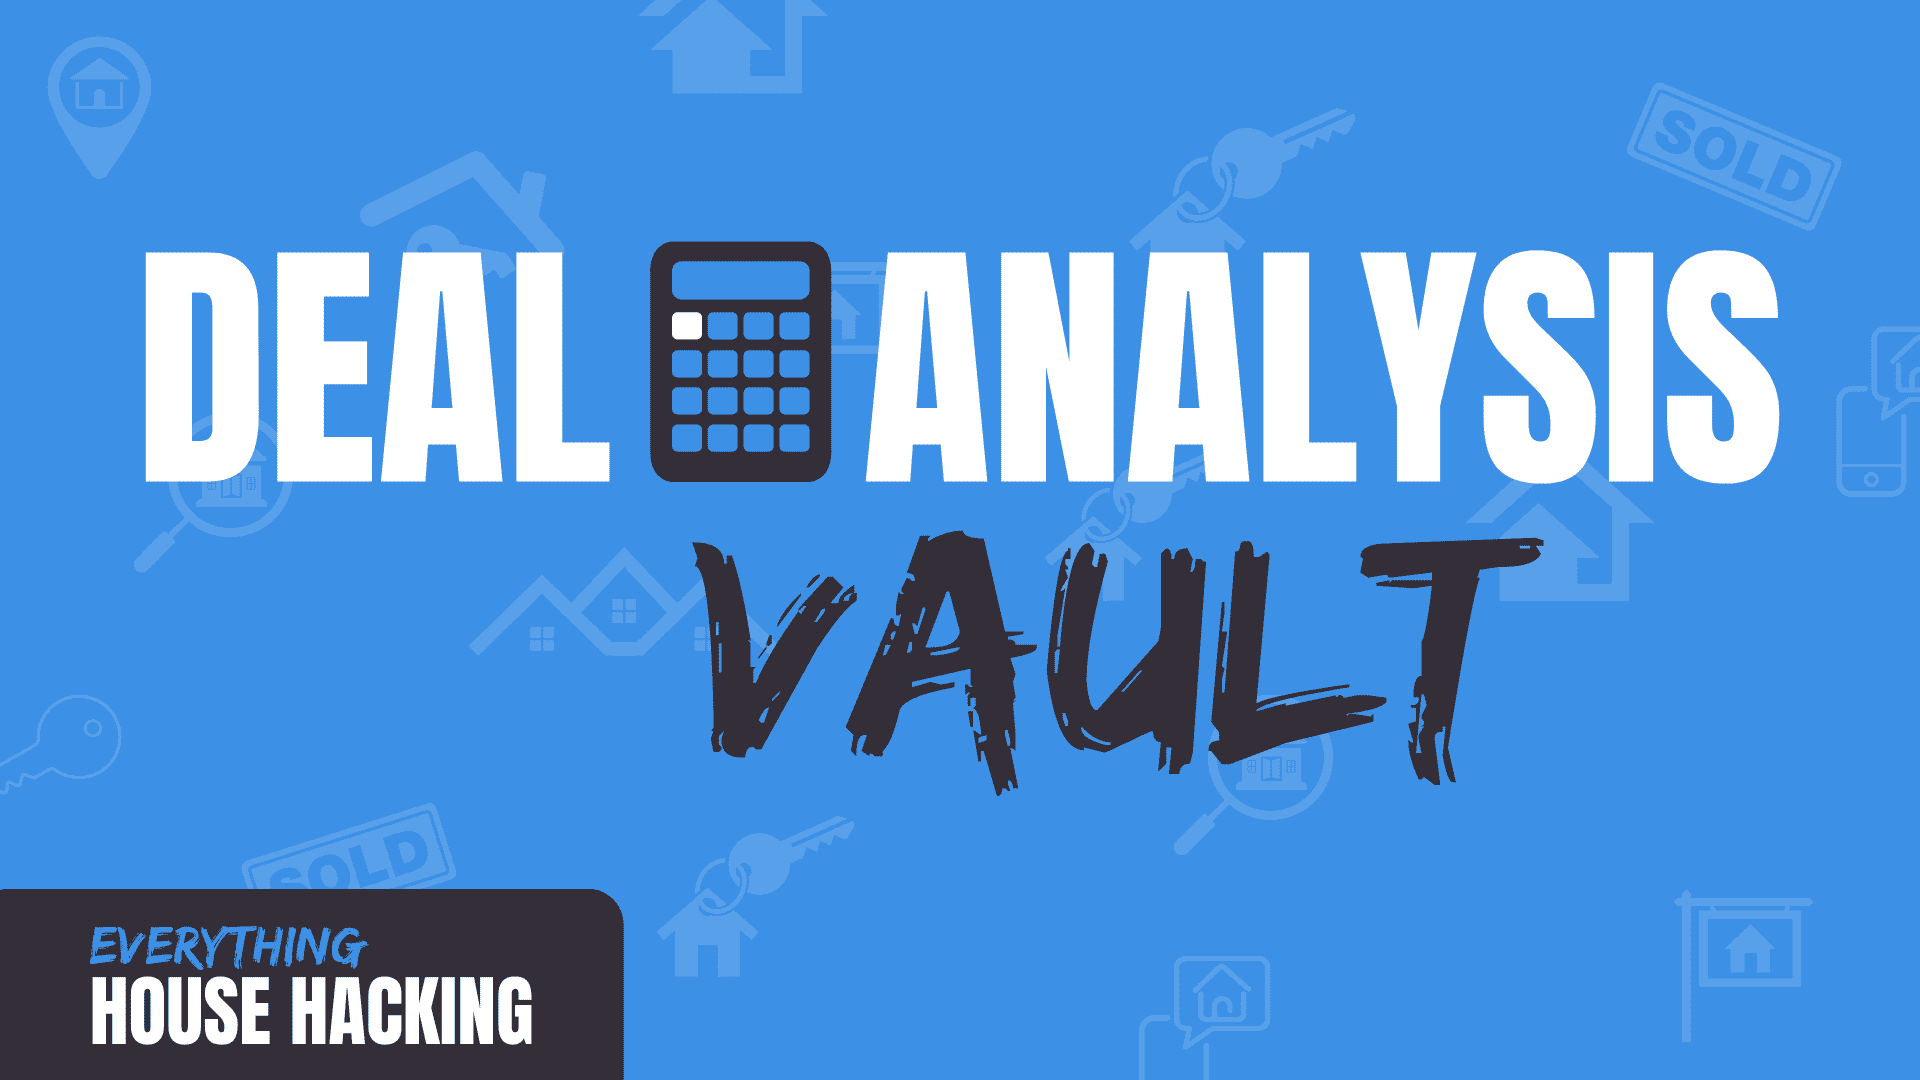 deal analysis vault in text with clipart image of calculator